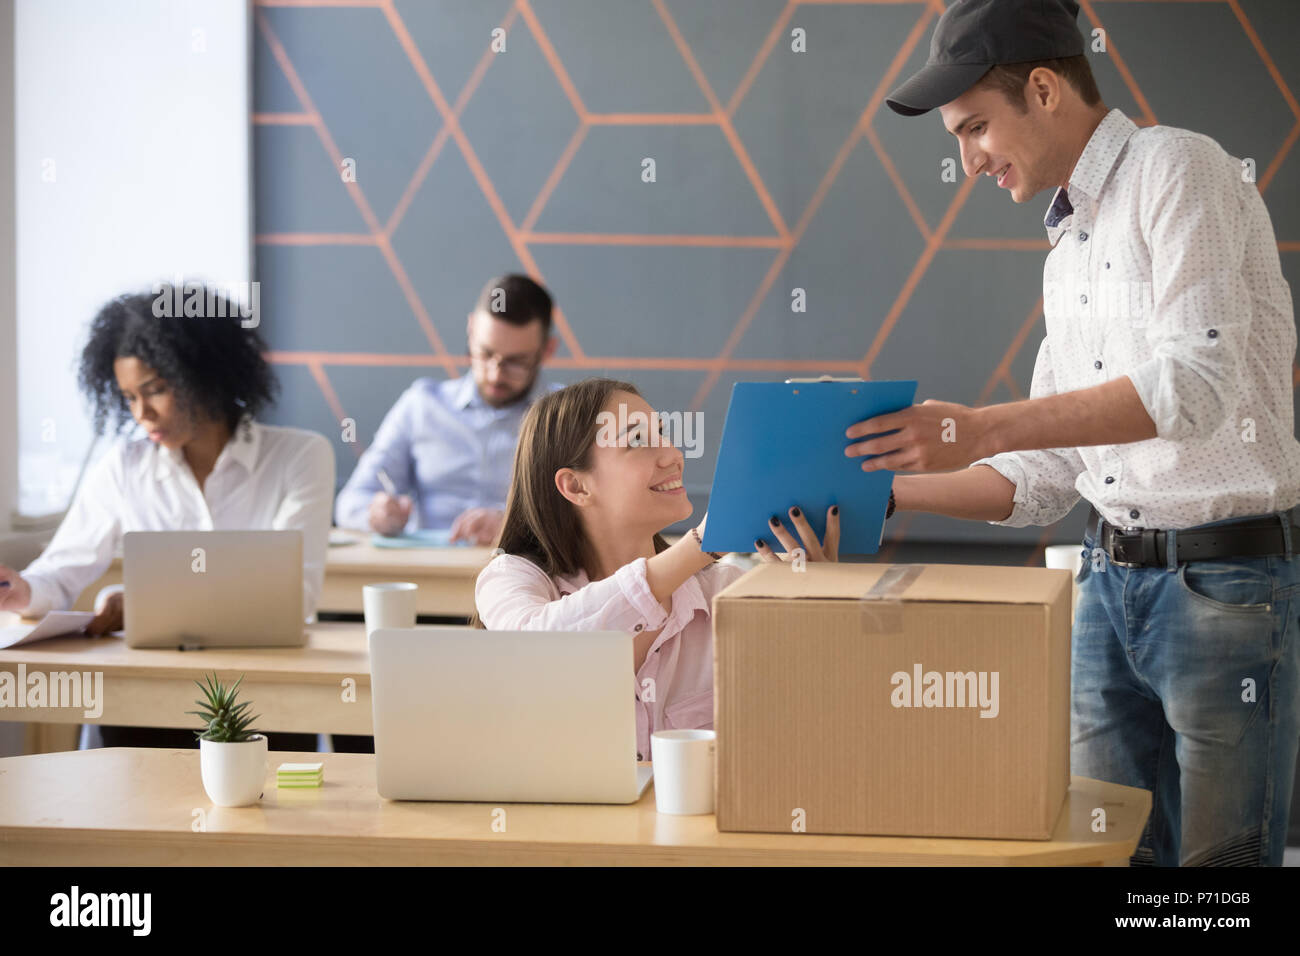 Deliveryman asking woman sign documents after package delivery i Stock Photo